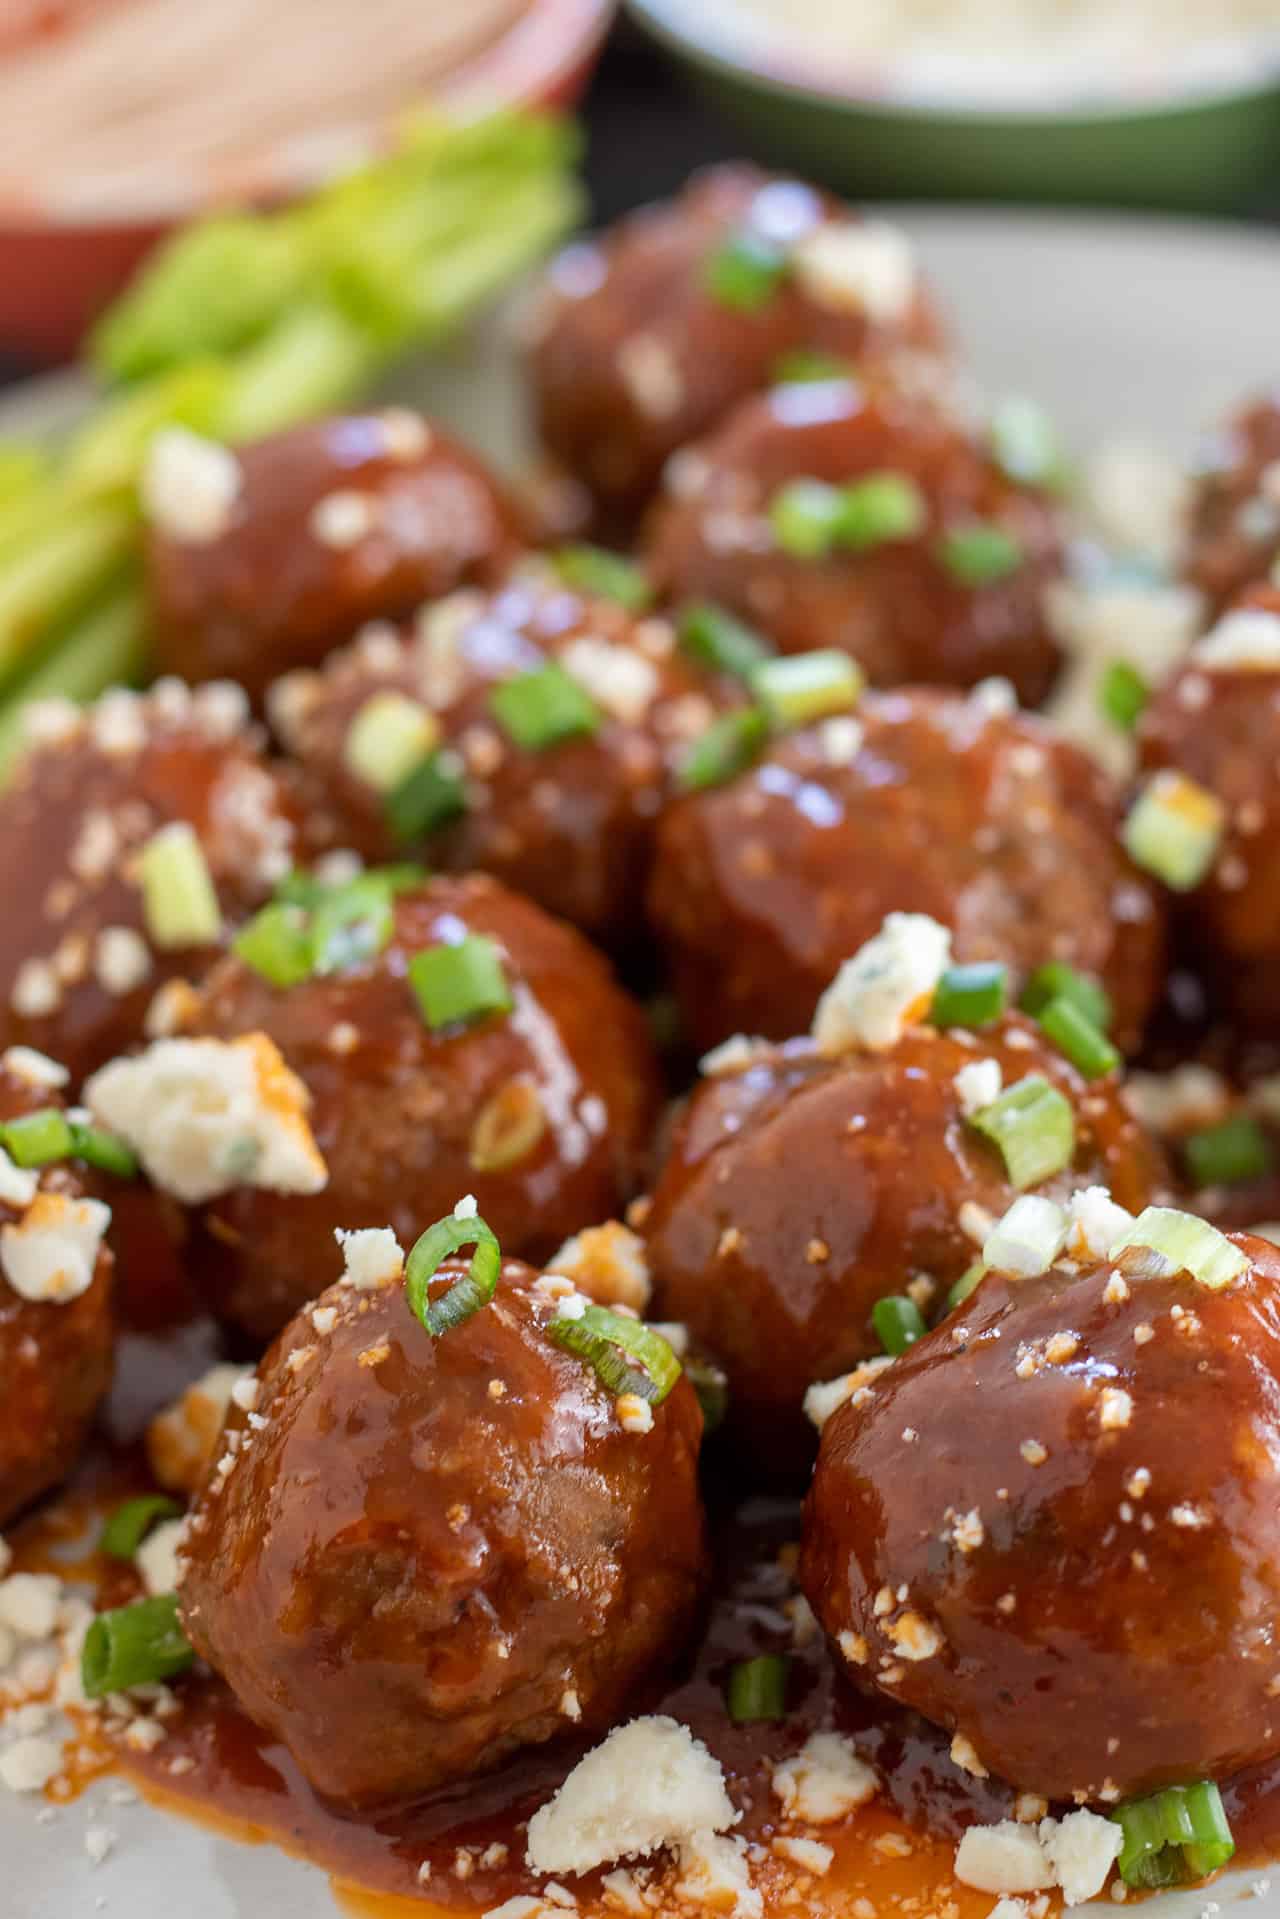 Chicken meatballs covered in a buffalo bbq sauce. They're topped with green onions and blue cheese crumbles.